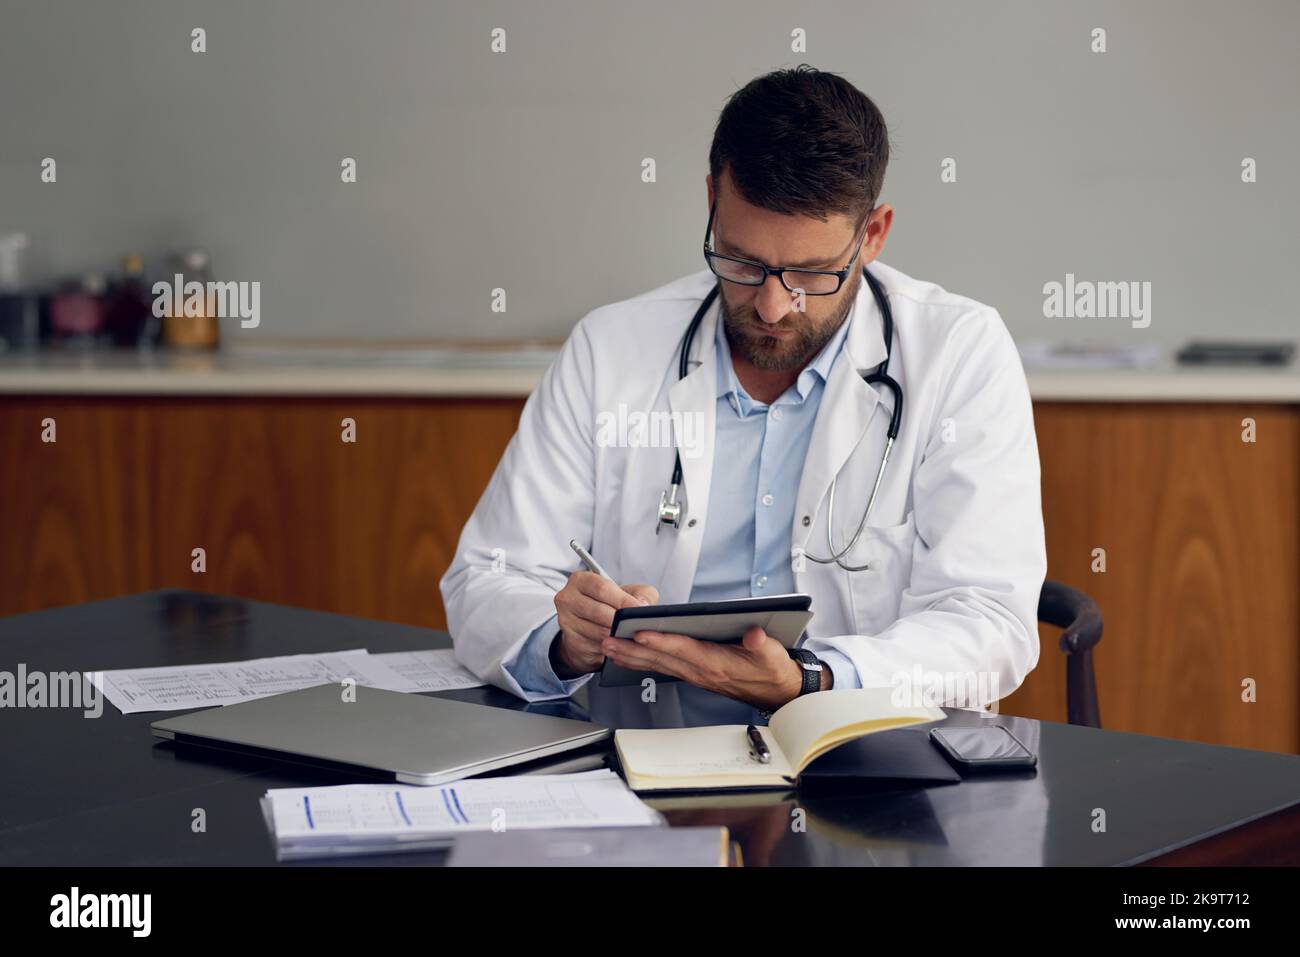 Wireless technology makes record-keeping a breeze. a handsome male doctor working on his tablet while sitting in his office. Stock Photo